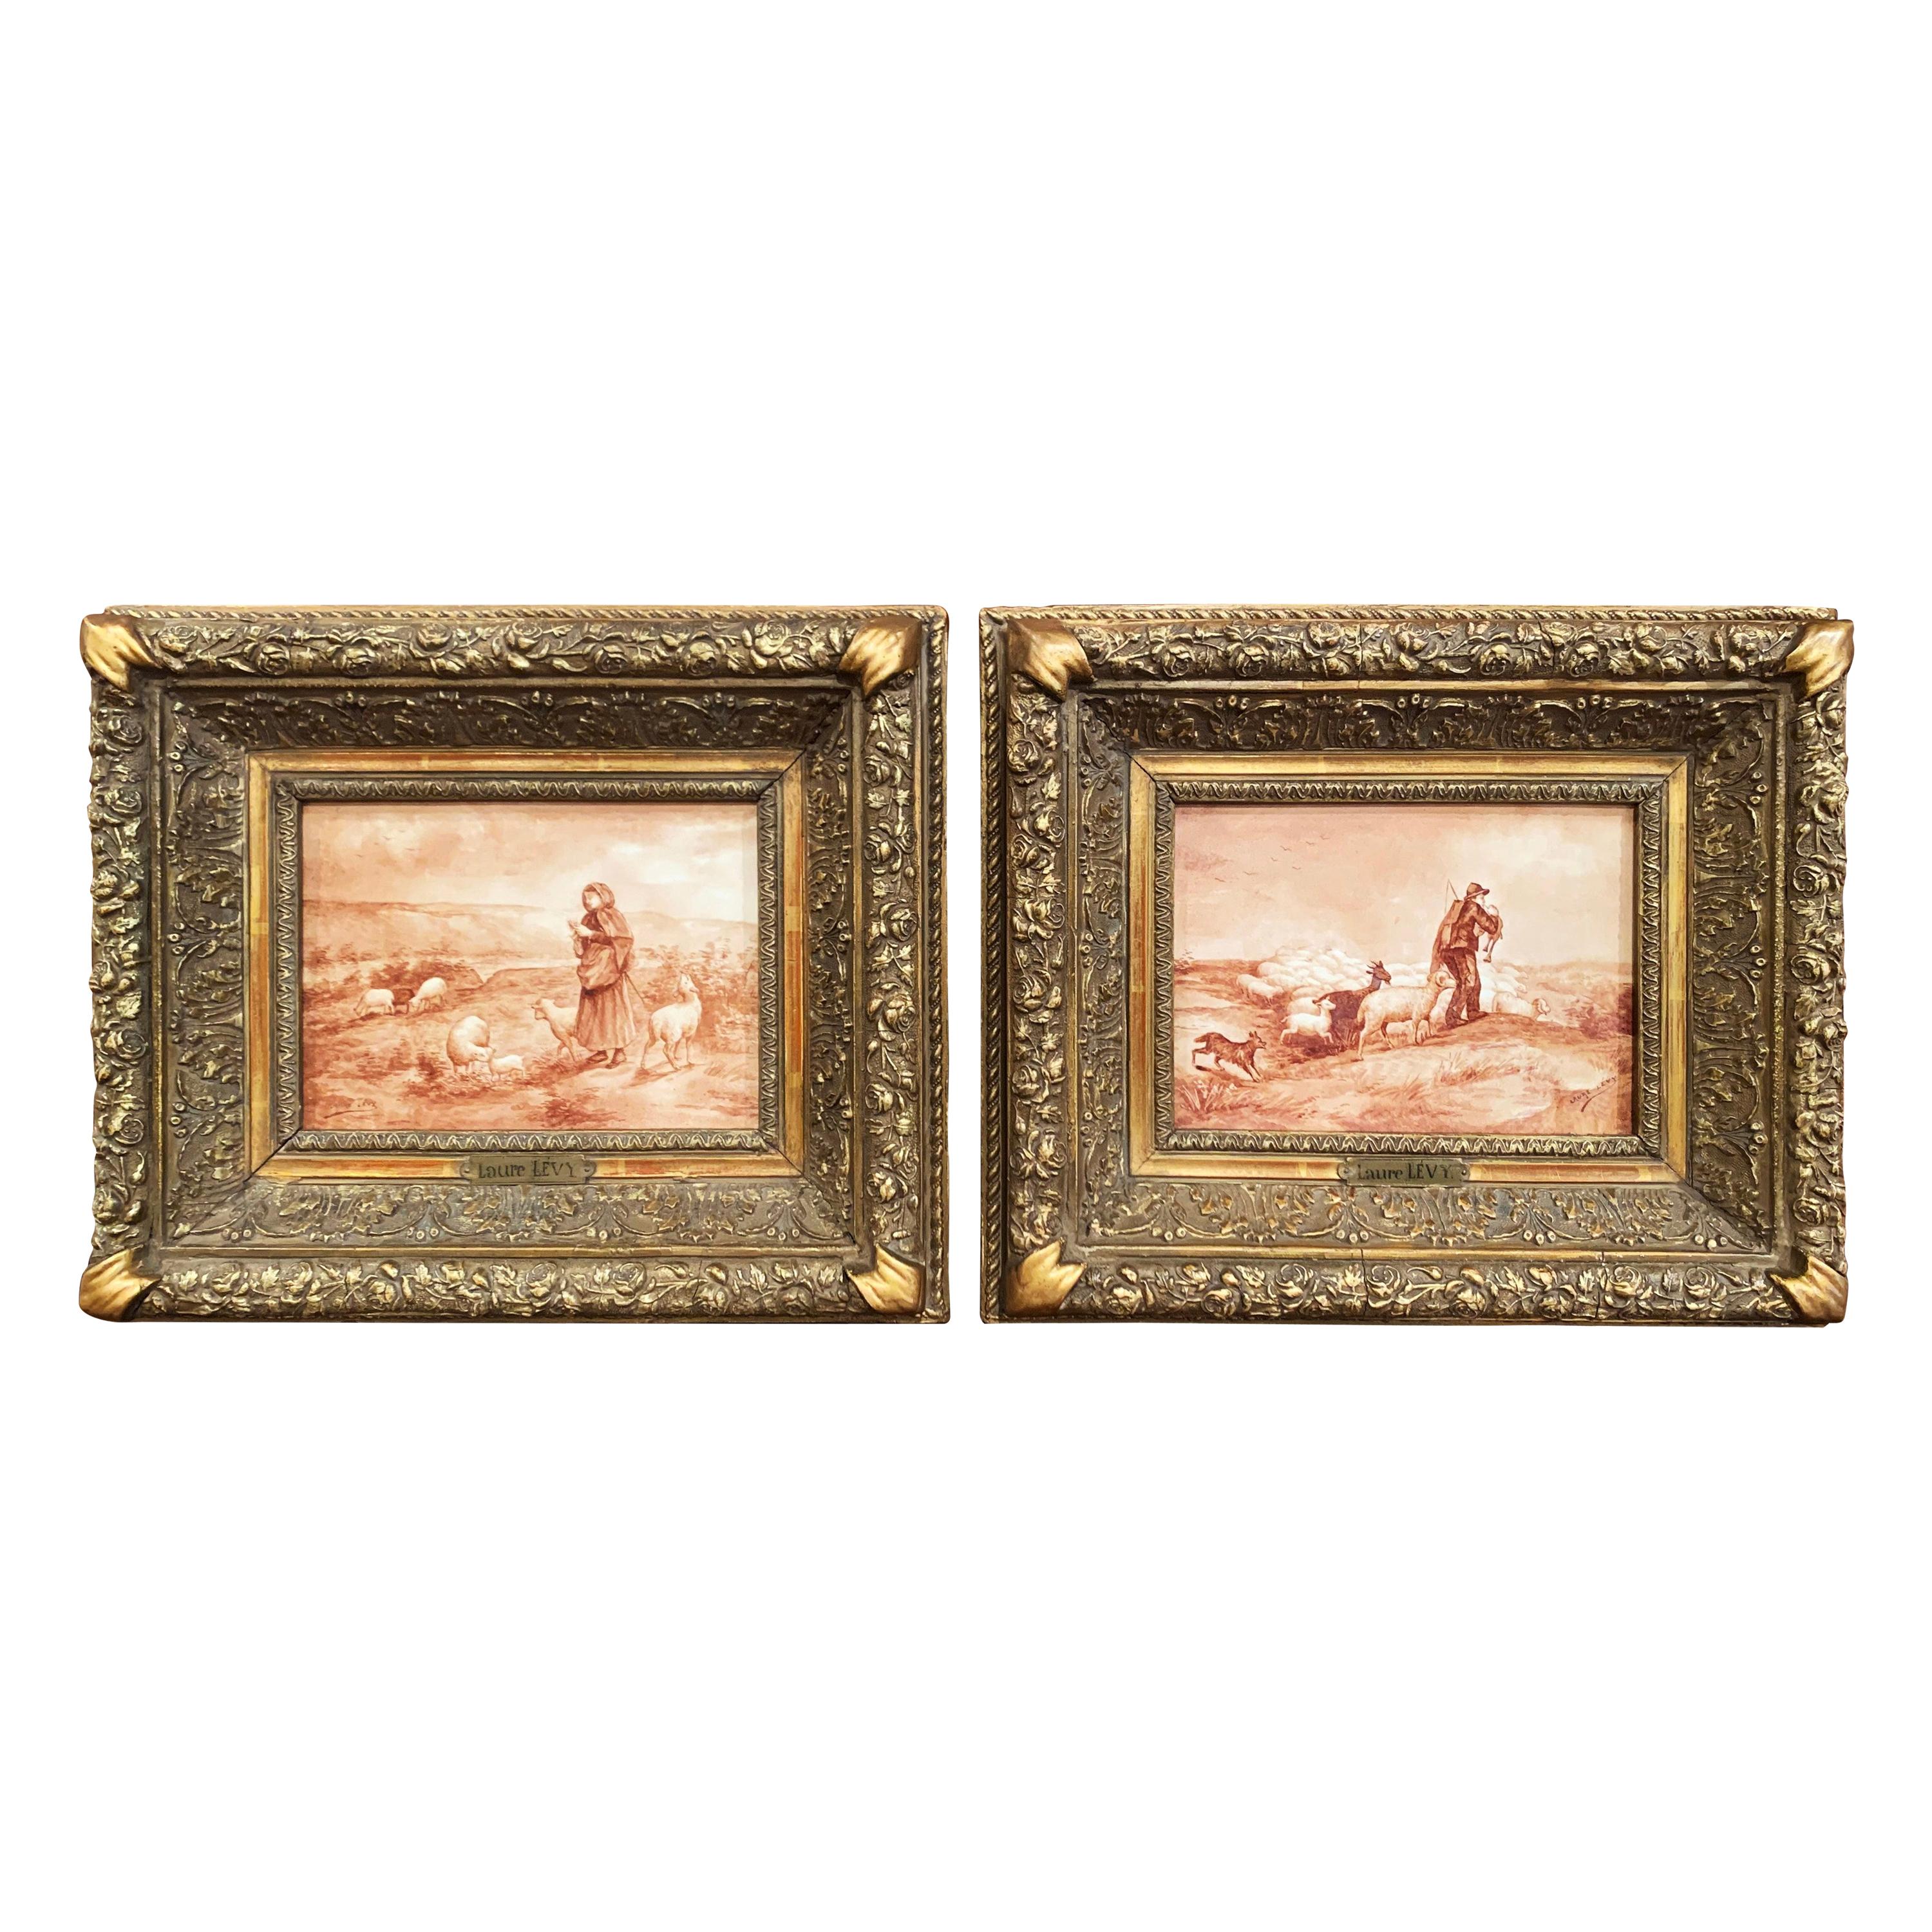 Pair of 19th Century French Porcelain Plaques in Gilt Frames Signed L. Levy